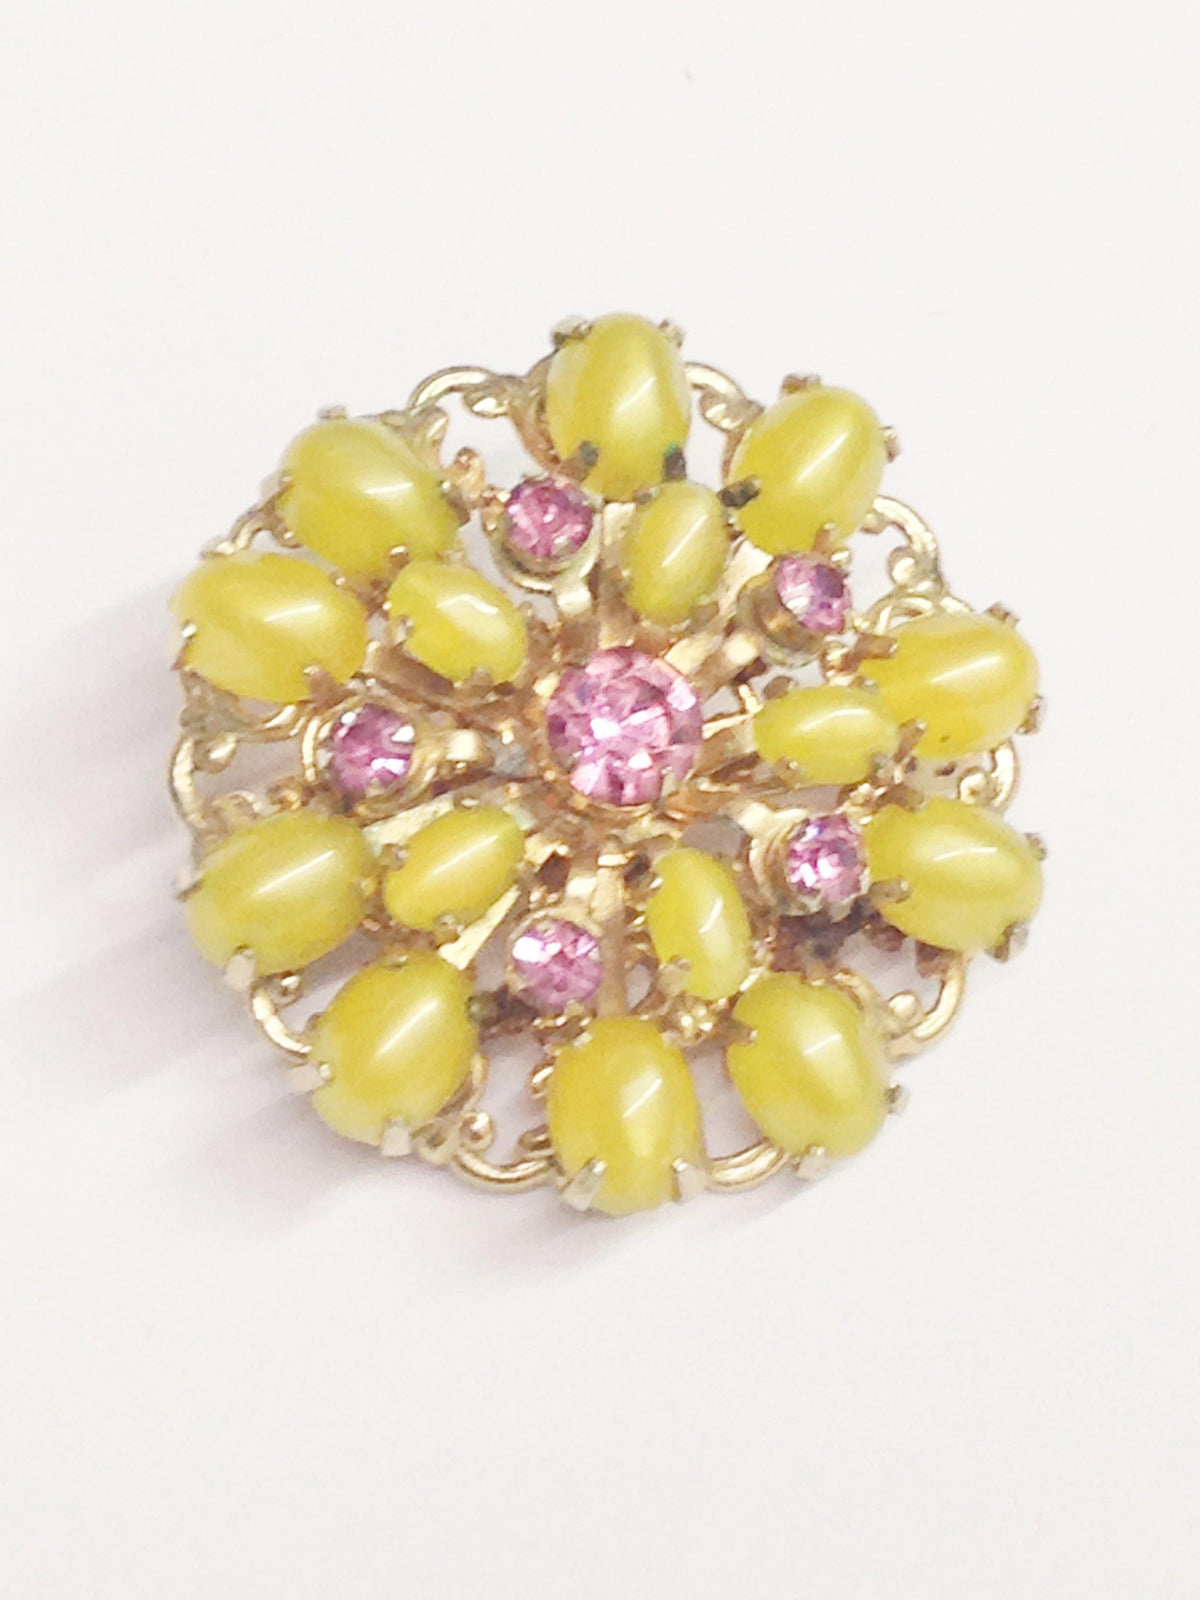 Vintage Yellow Lucite W/ Pink Rhinestones Brooch Pin - Hers and His Treasures